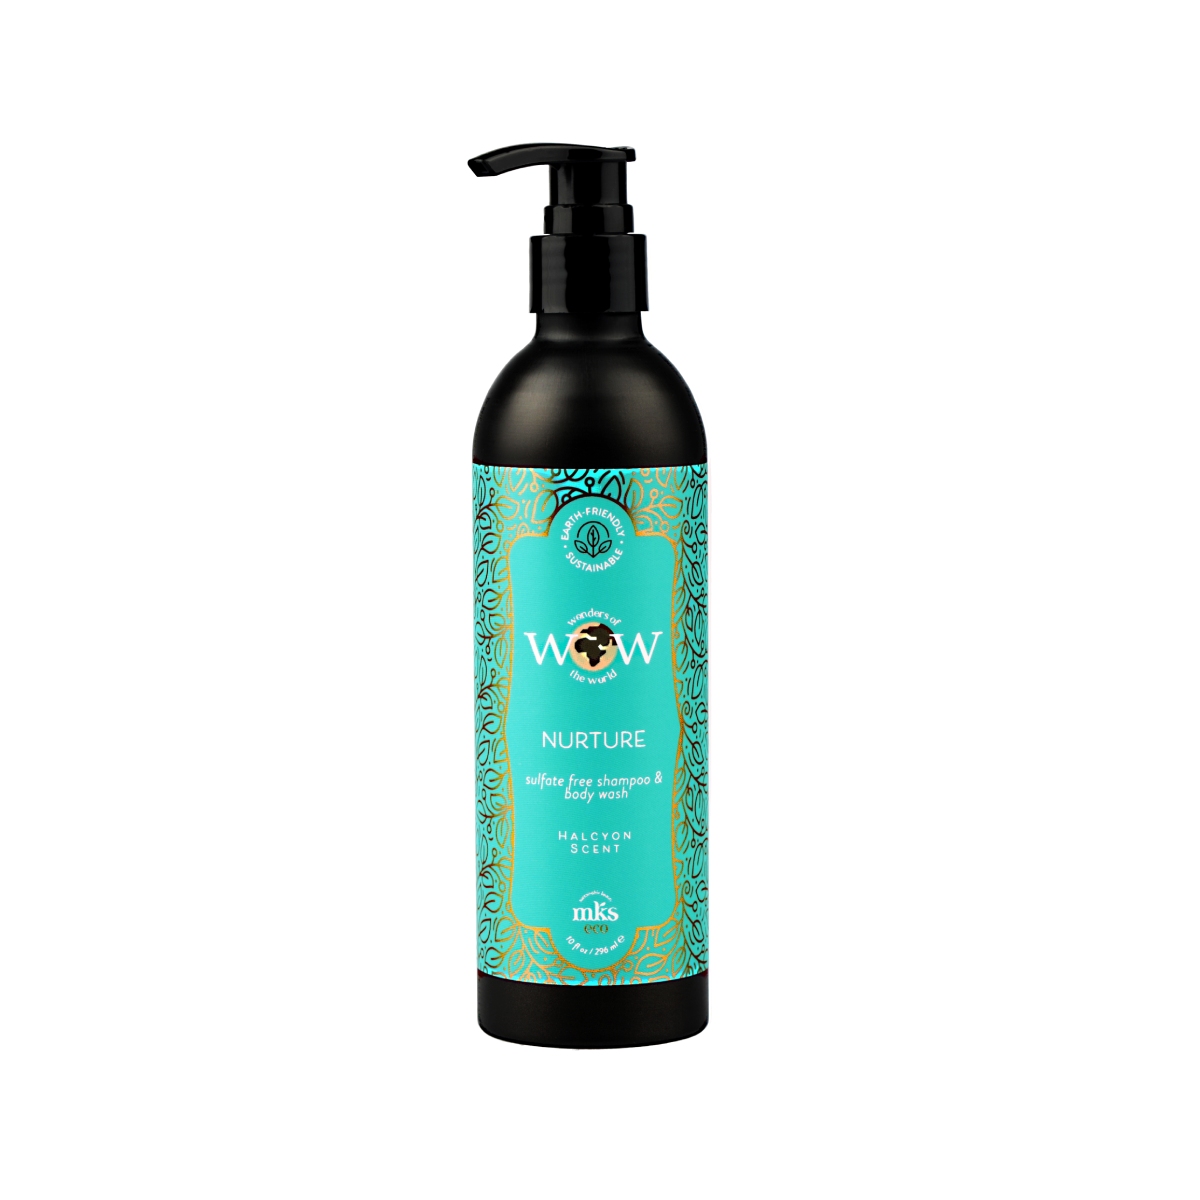 MKS eco WOW Nurture Sulfate-Free & Body Wash | Shop Earthly Body